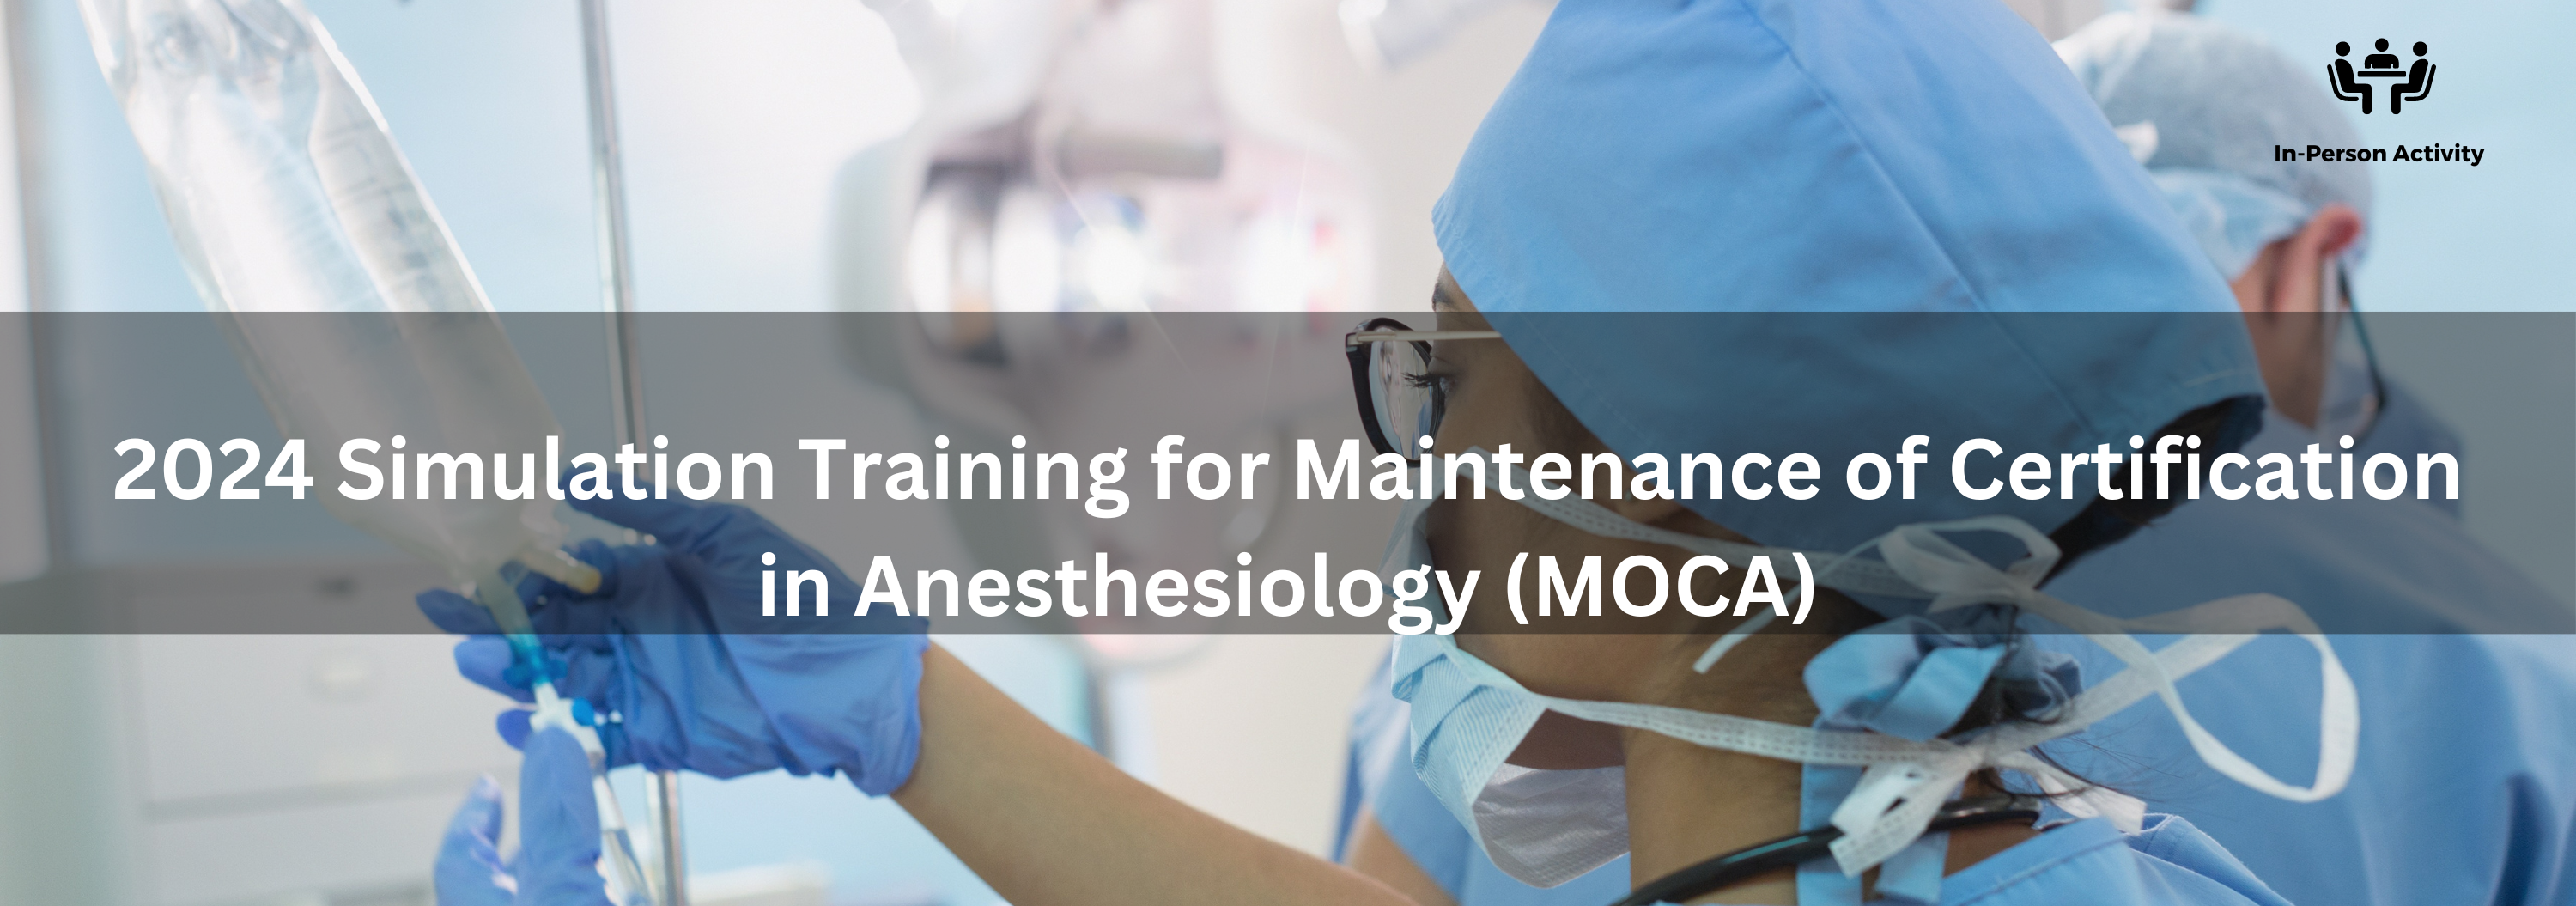 Simulation Training for Maintenance of Certification in Anesthesiology (MOCA) - September Banner